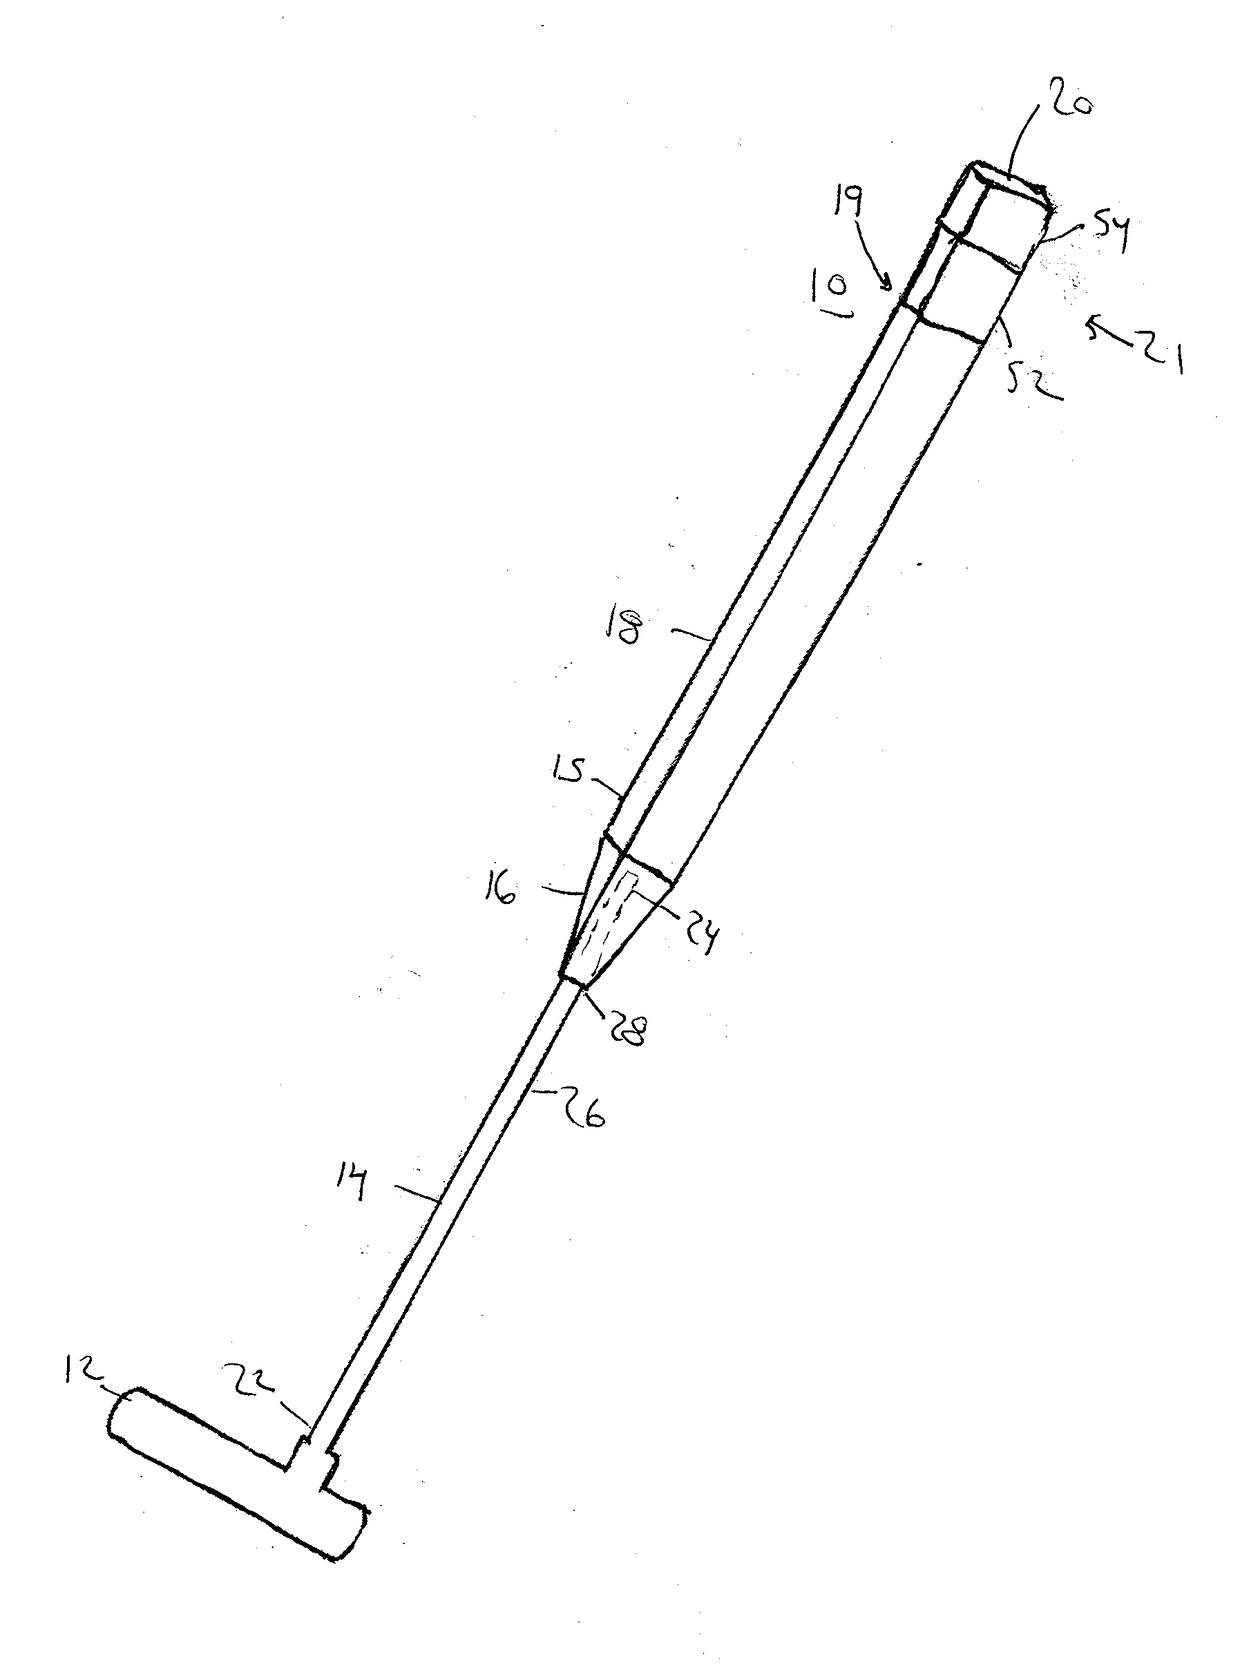 Golf club with grip arranged to facilitate alignment and method of making the same